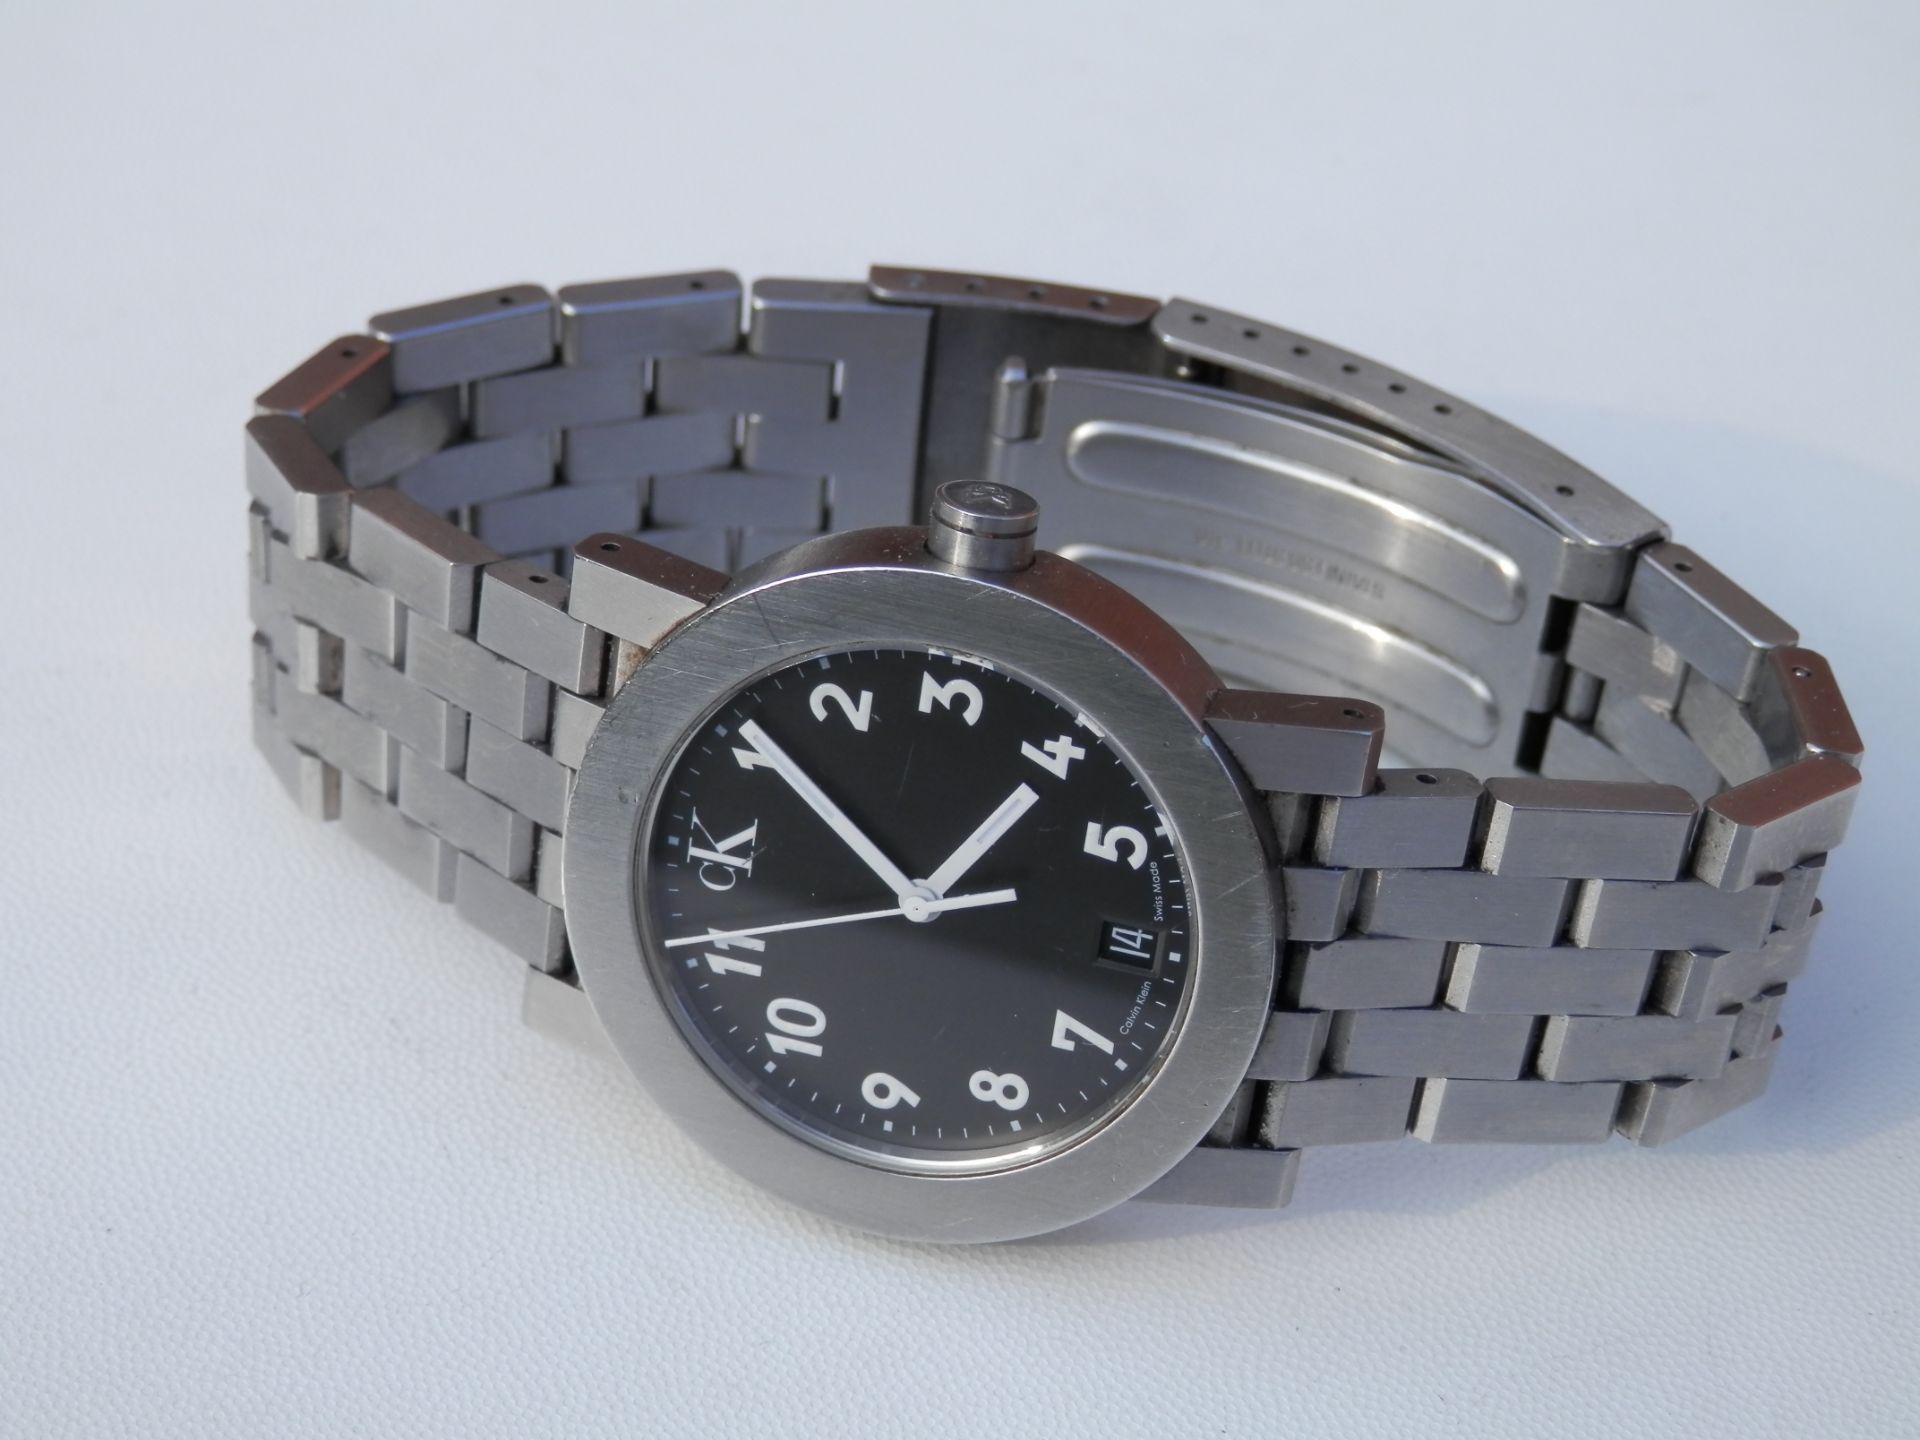 SUPERB SWISS GENTS 100% GENUINE CALVIN KLEIN K8111 FULL STAINLESS WATCH WITH MILITARY LOOK DIAL, - Image 7 of 12